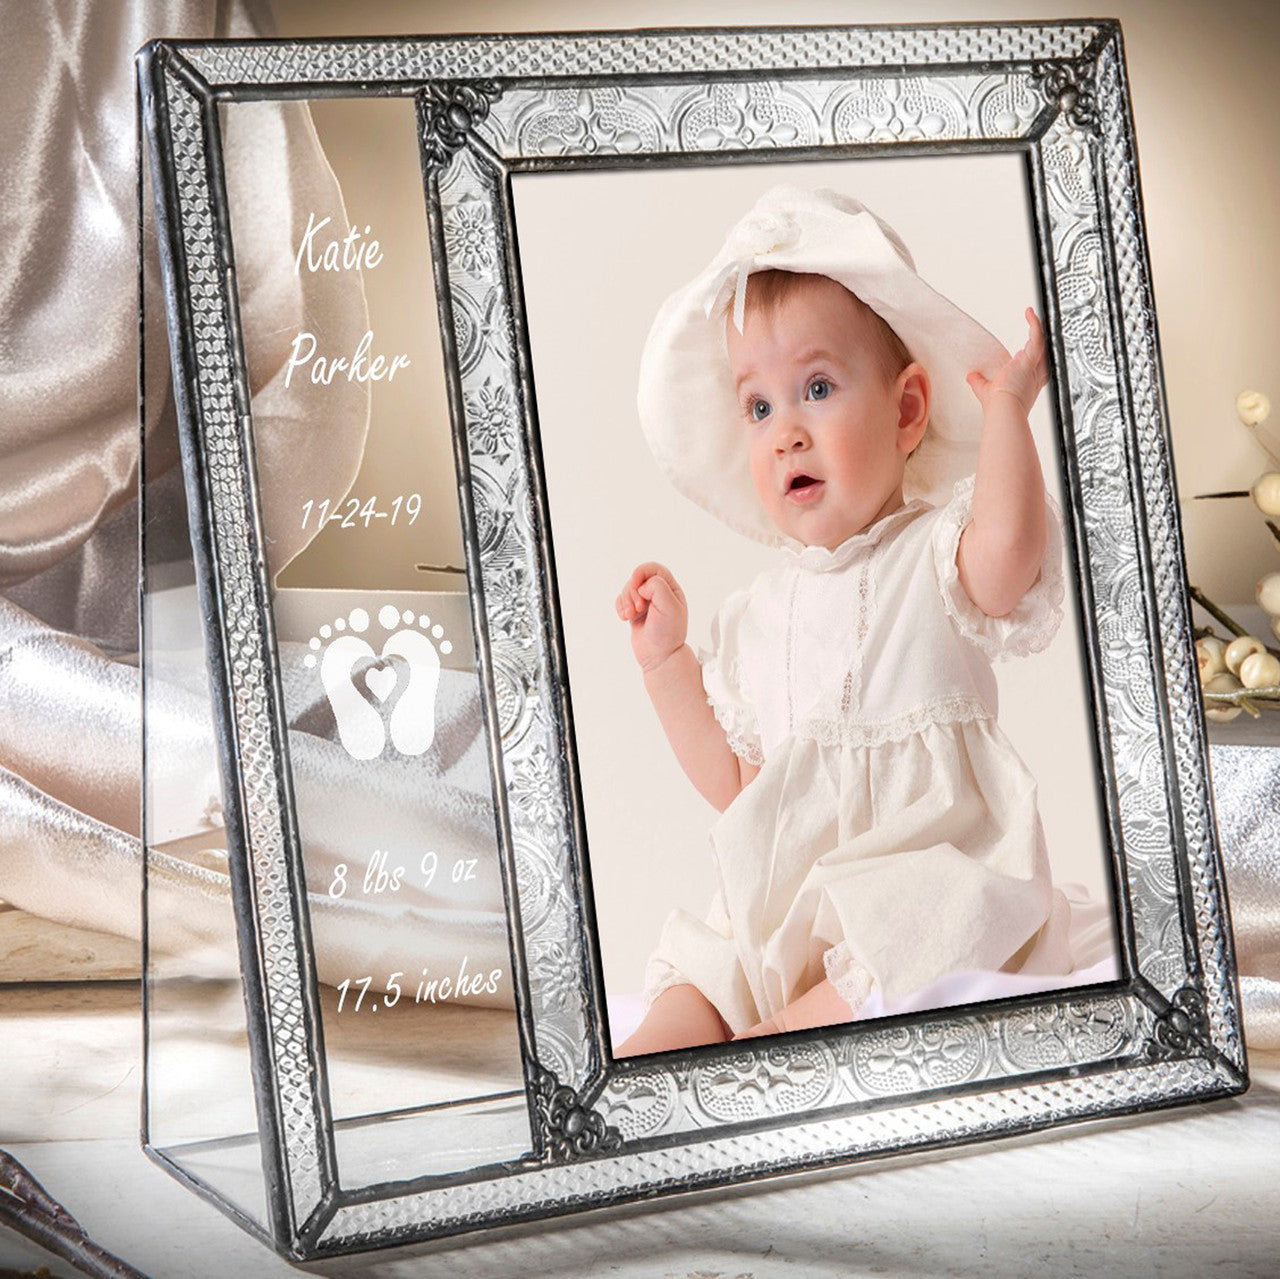 Vintage Baby Frame Personalized Gift by J Devlin | Pic 393-57V EP636